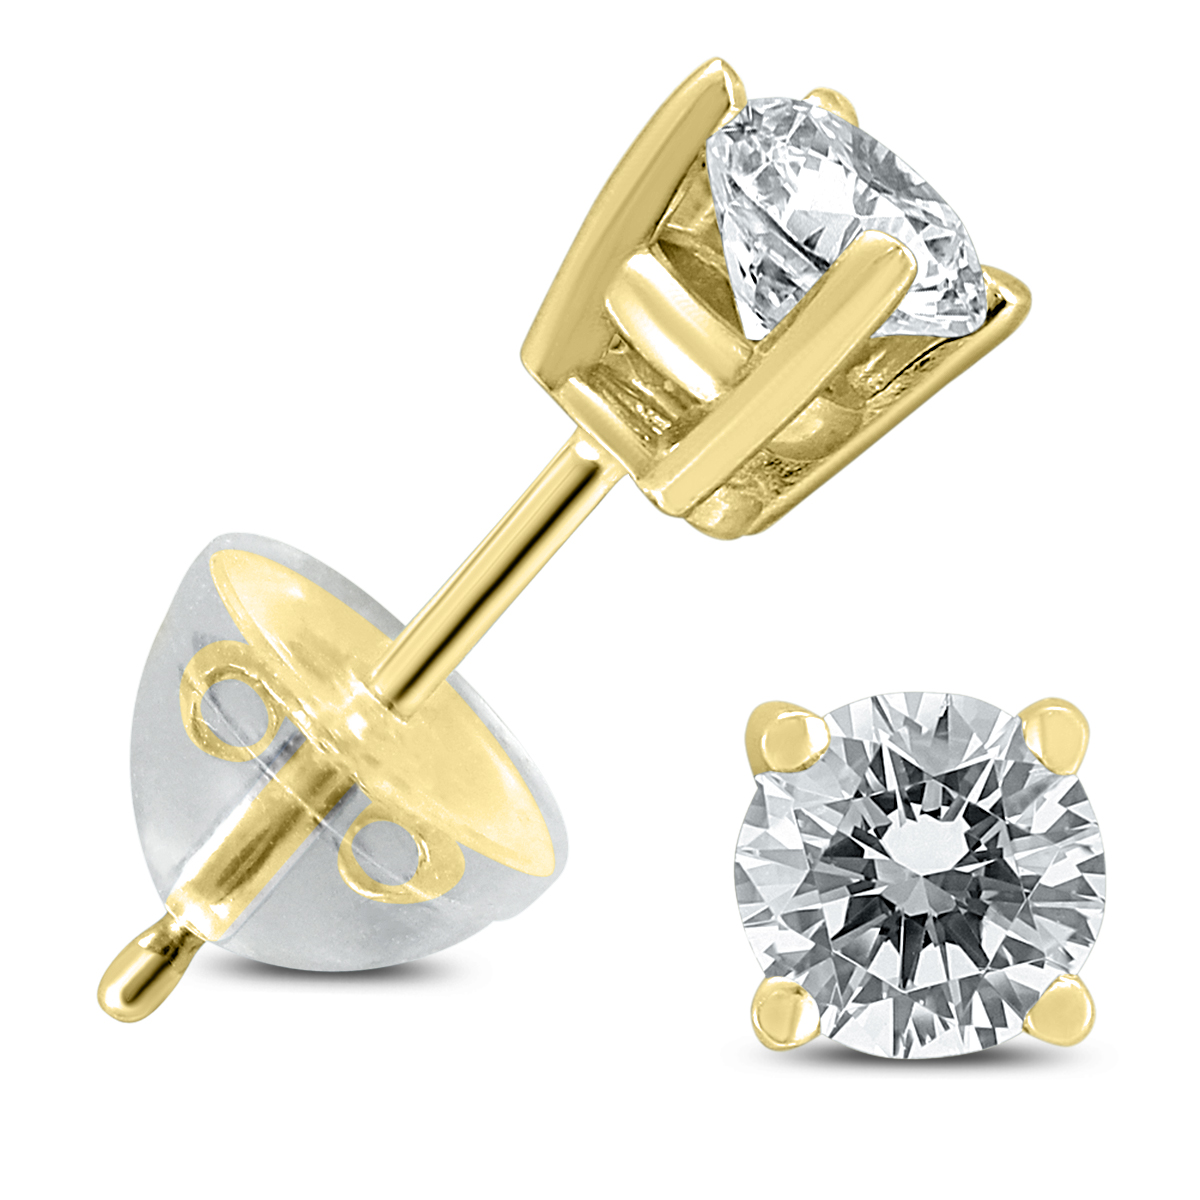 .45CTW Round Diamond Solitaire Stud Earrings In 14k Yellow Gold with Silicon Backs